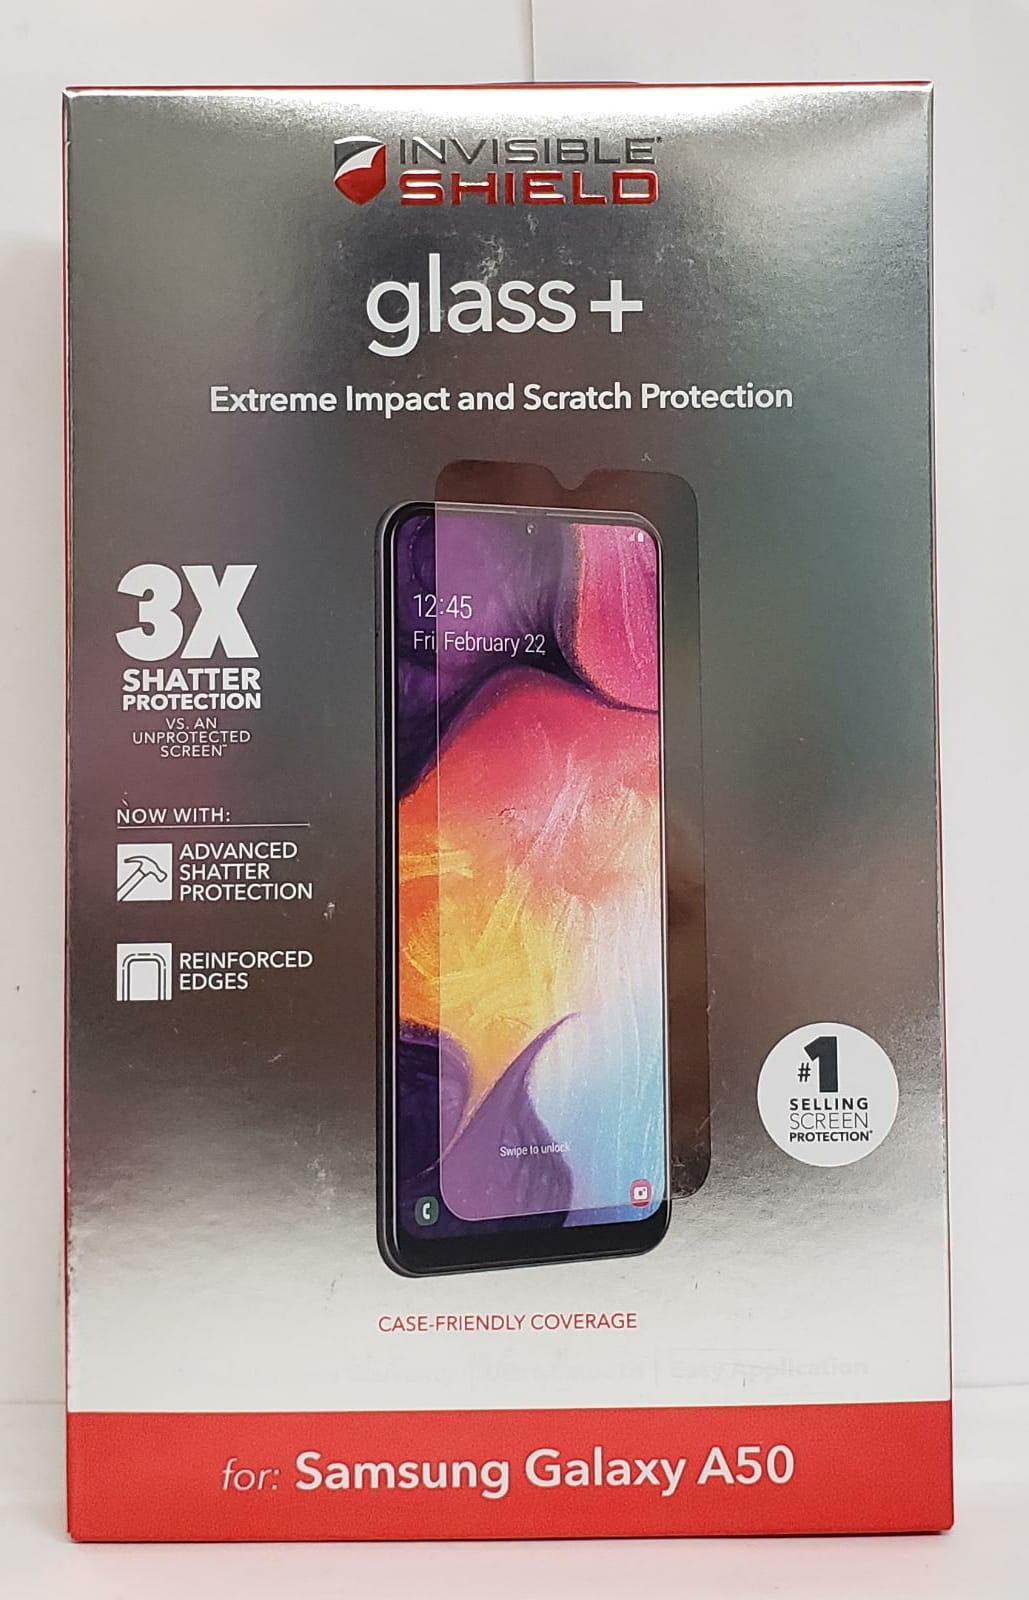 ZAGG - InvisibleShield Glass+ Screen Protector for Samsung Galaxy A20 - $6.89